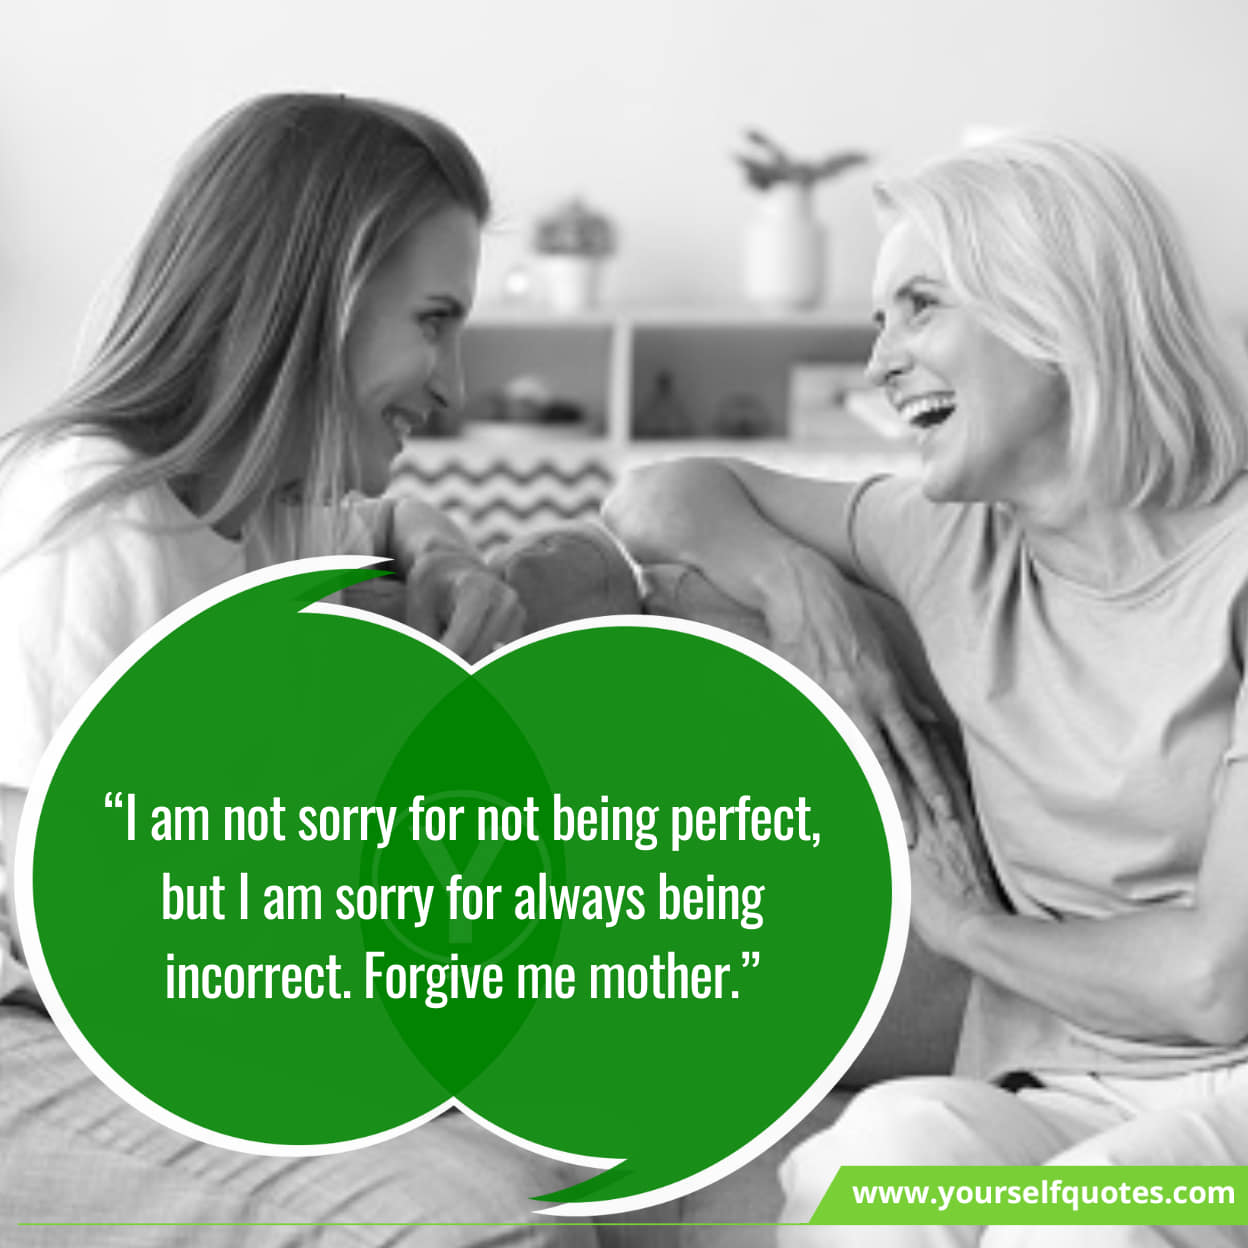 Best Heart-Touching Apology Mom Quotes